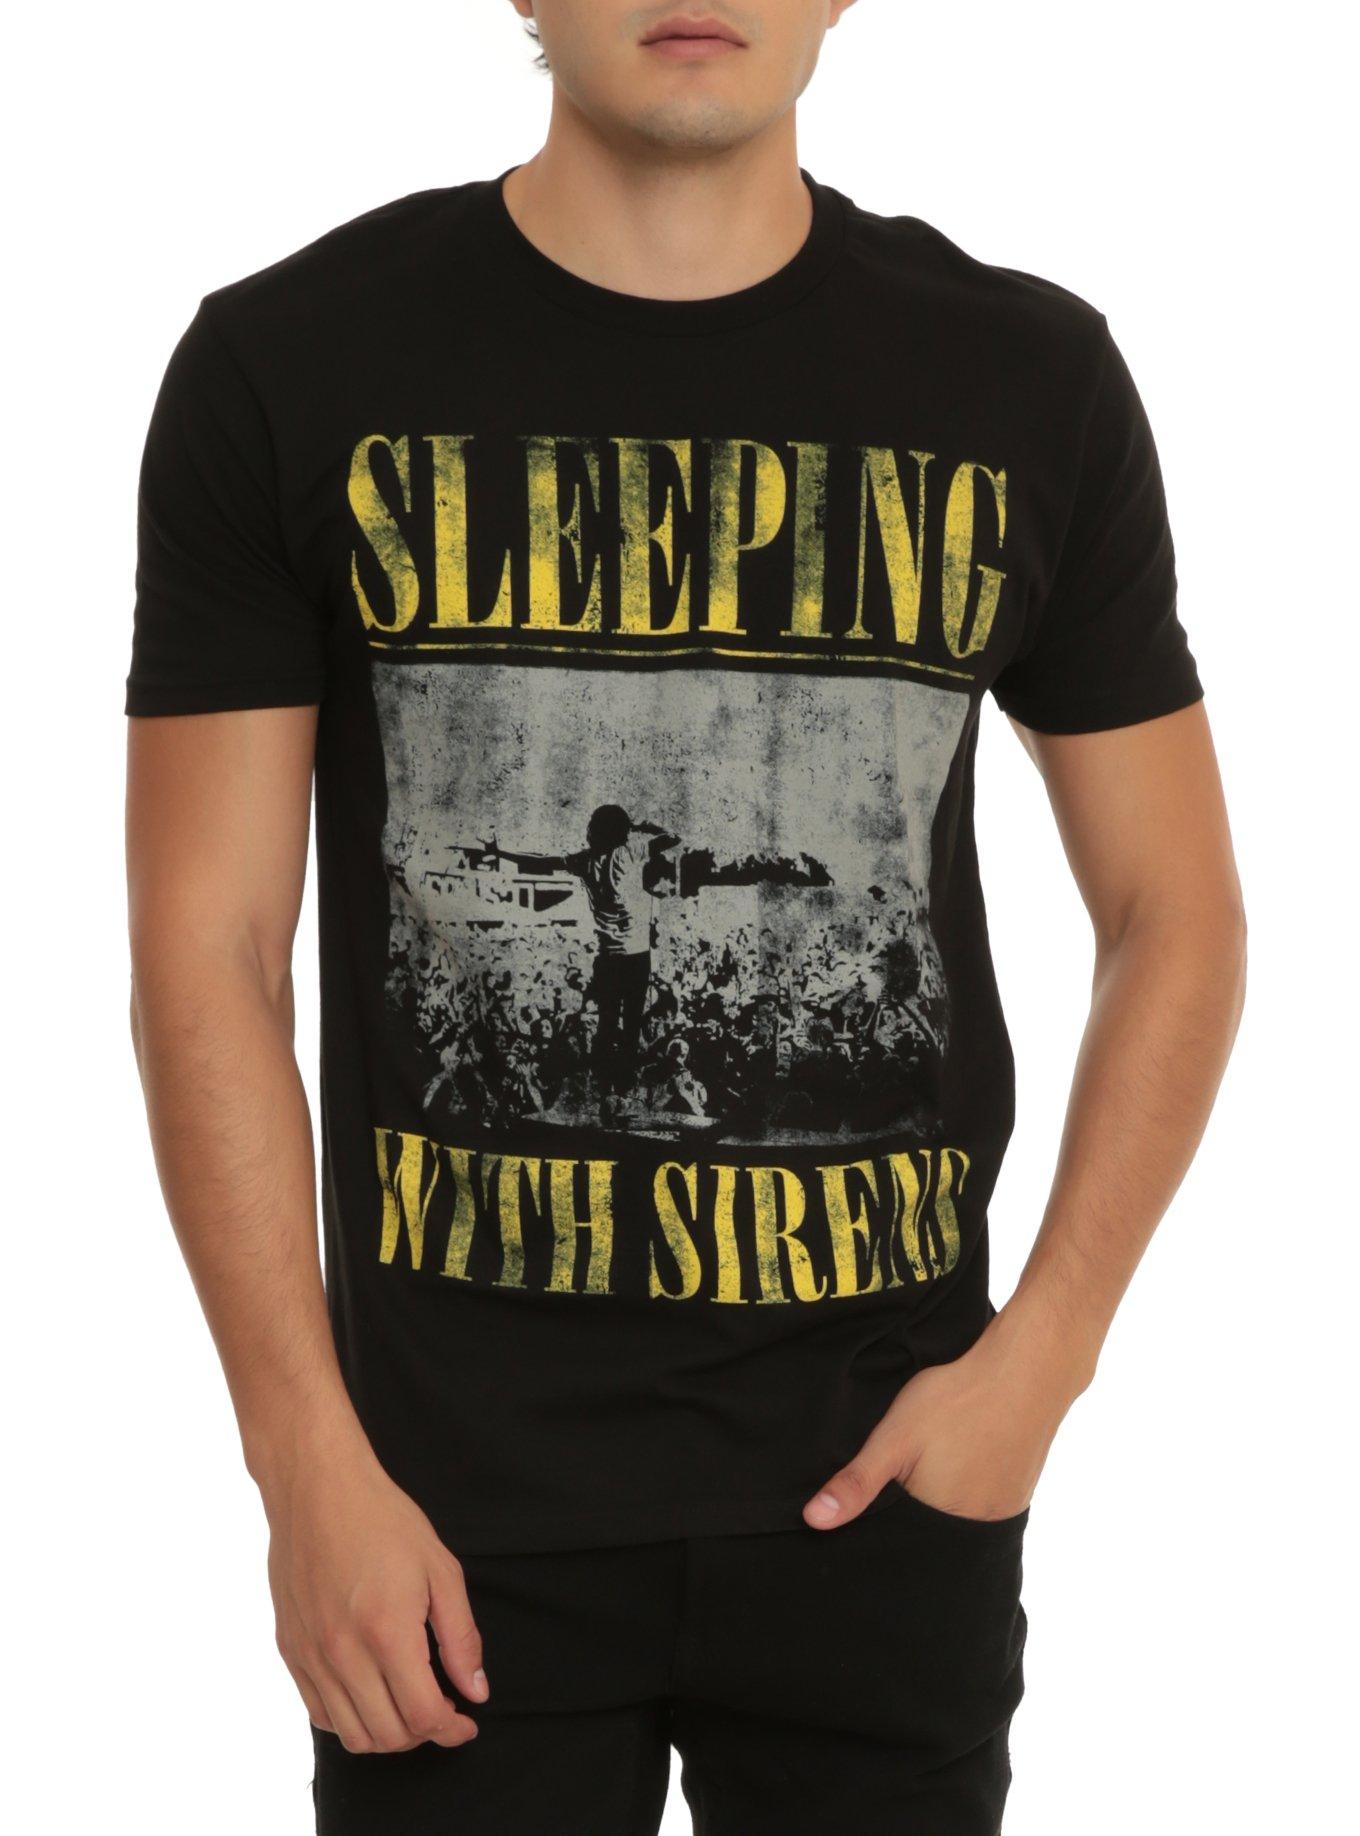 Sleeping With Sirens Faded Live T-Shirt, BLACK, hi-res